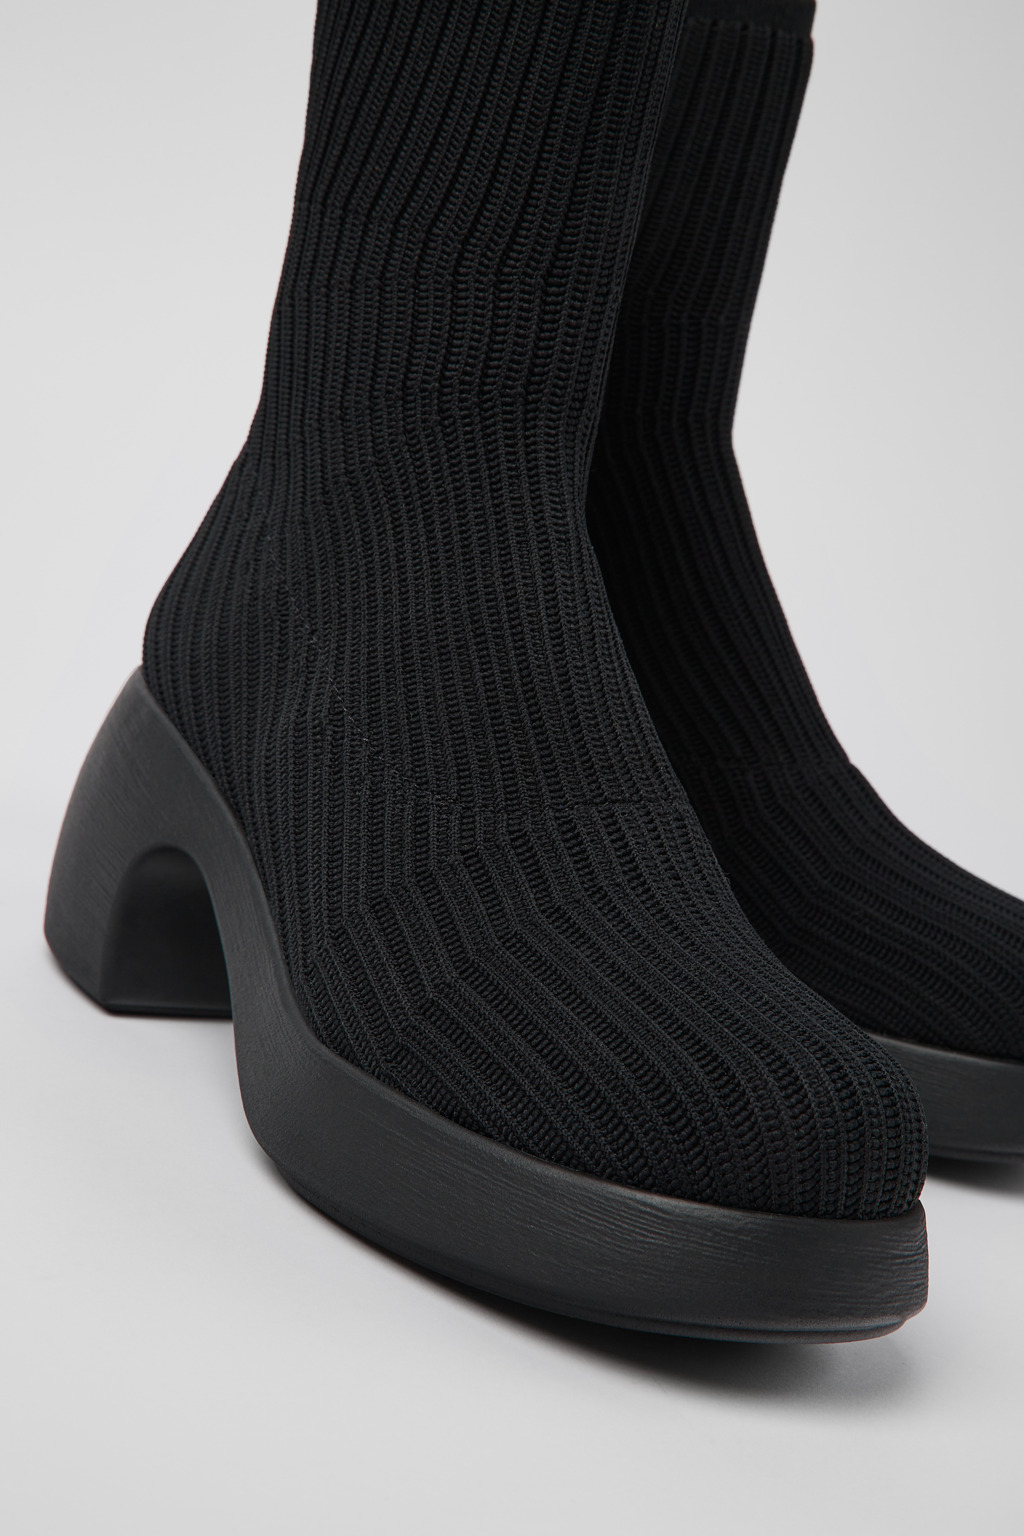 Thelma Black Ankle Boots for Women - Fall/Winter collection